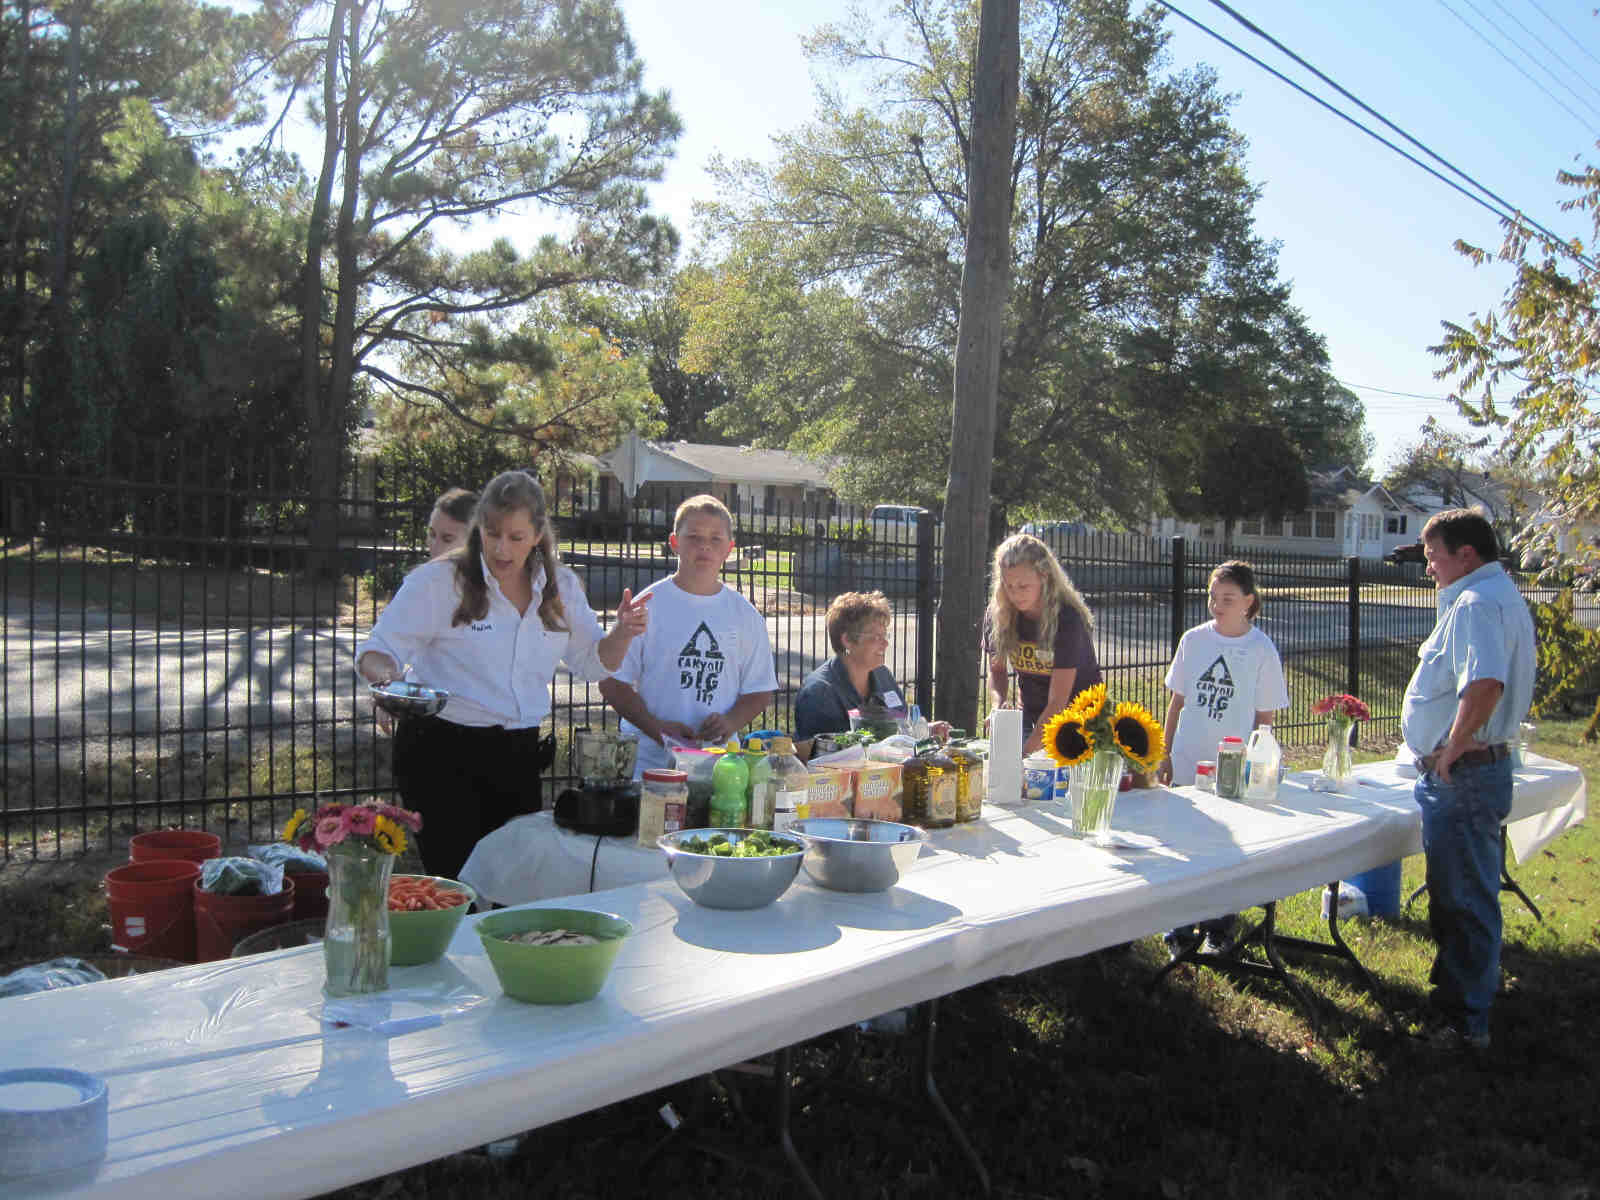 Nadine shows students how to turn their garden grown basil into great tasting pesto.